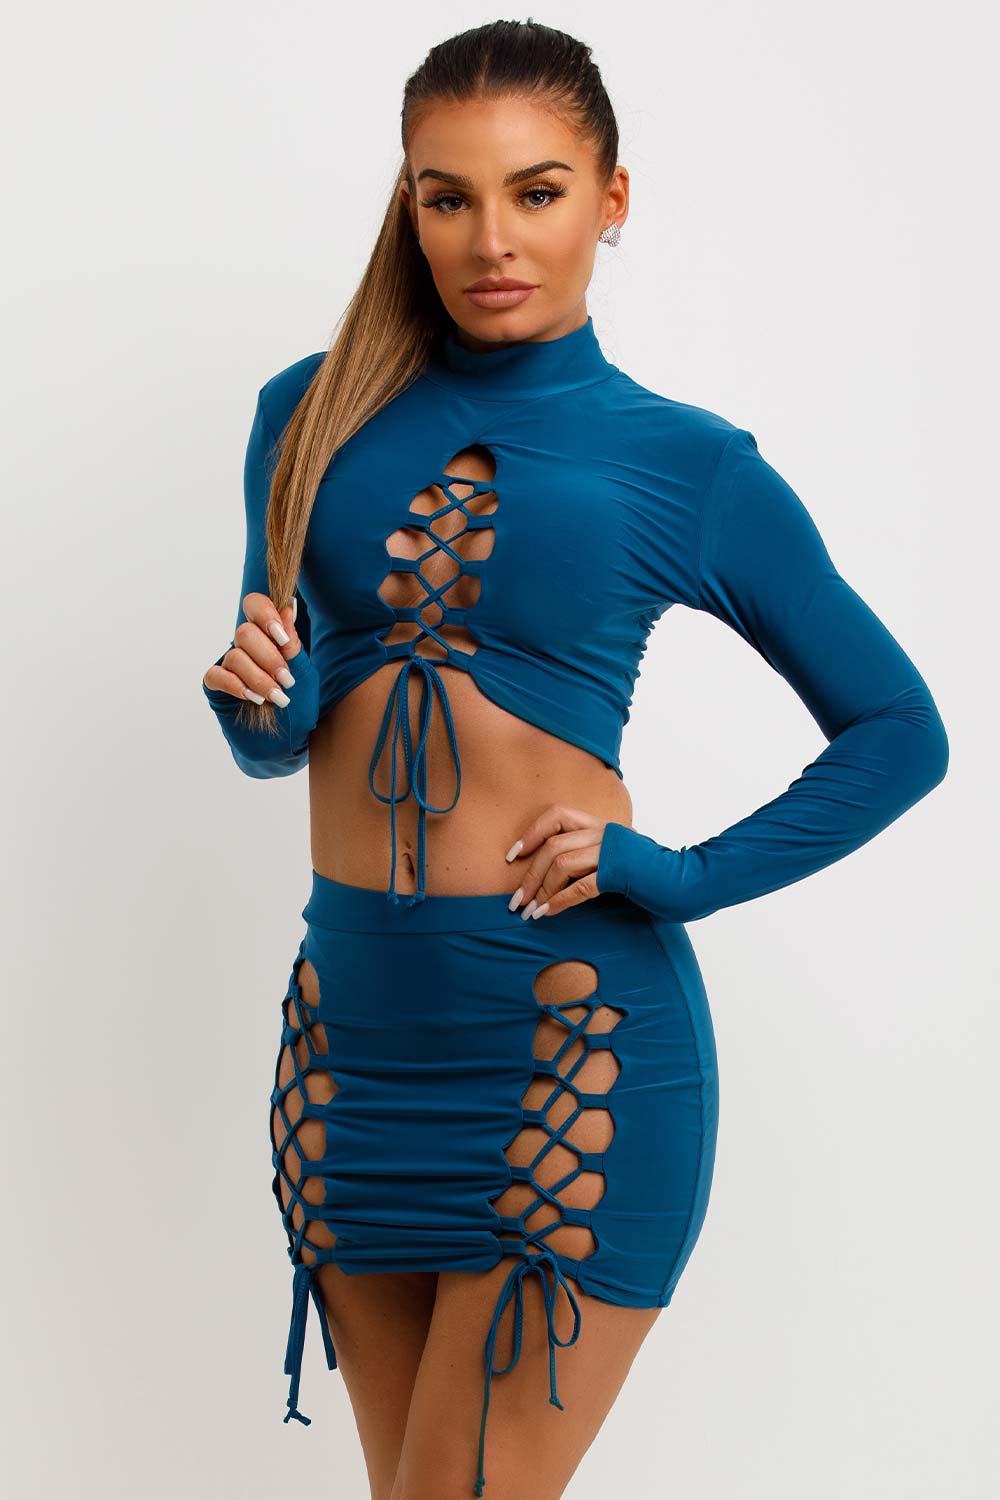 long sleeve cut out lace up skirt and crop top co ord set festival rave going out outfit